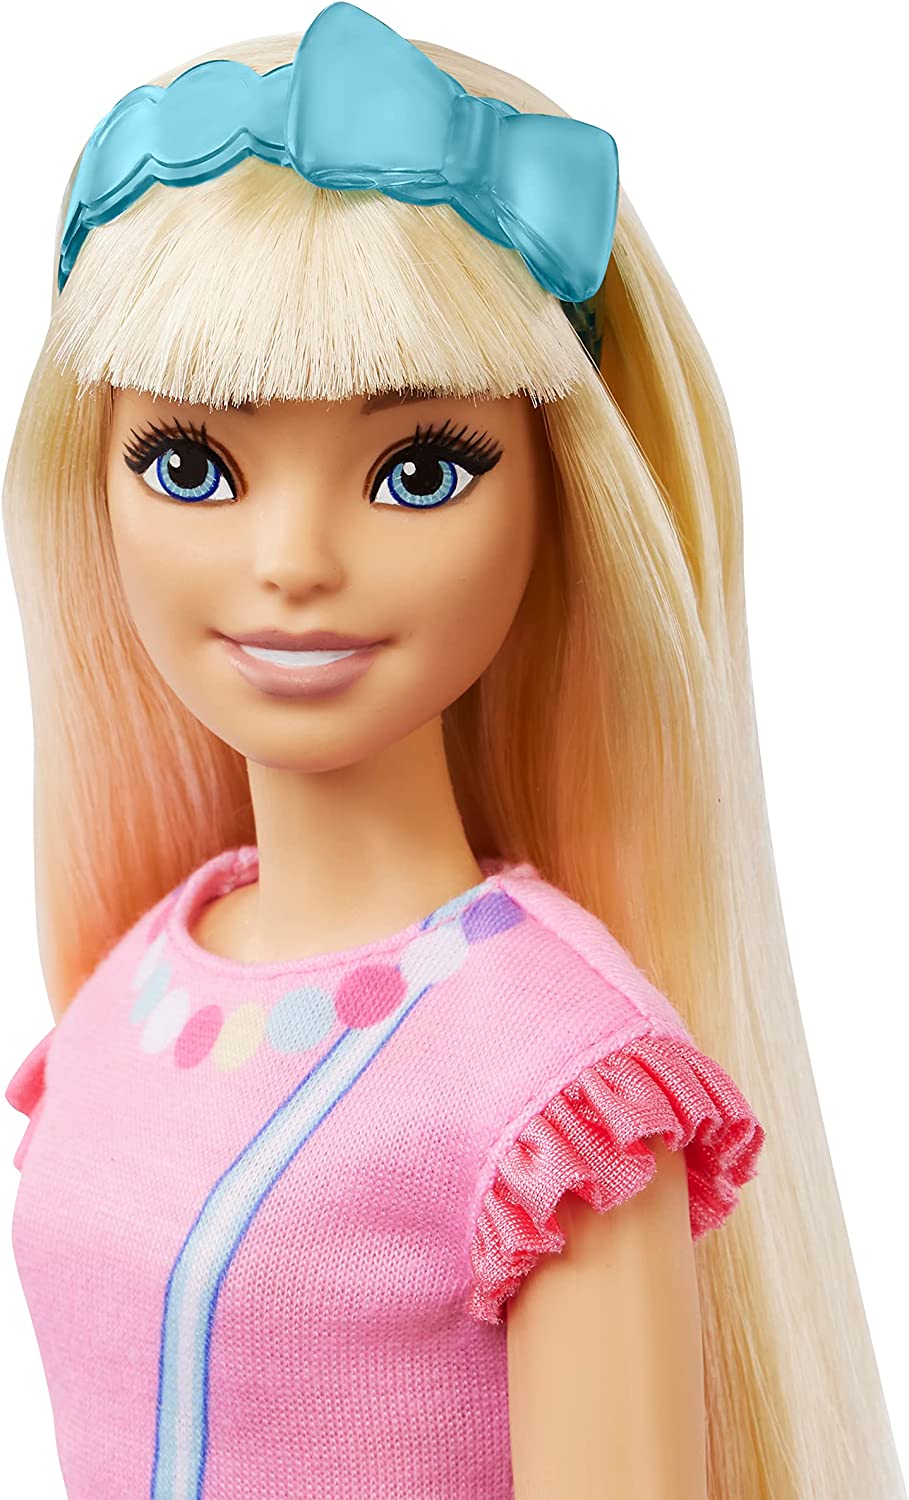 1671550357 Youloveit Com My First Barbie Doll3 